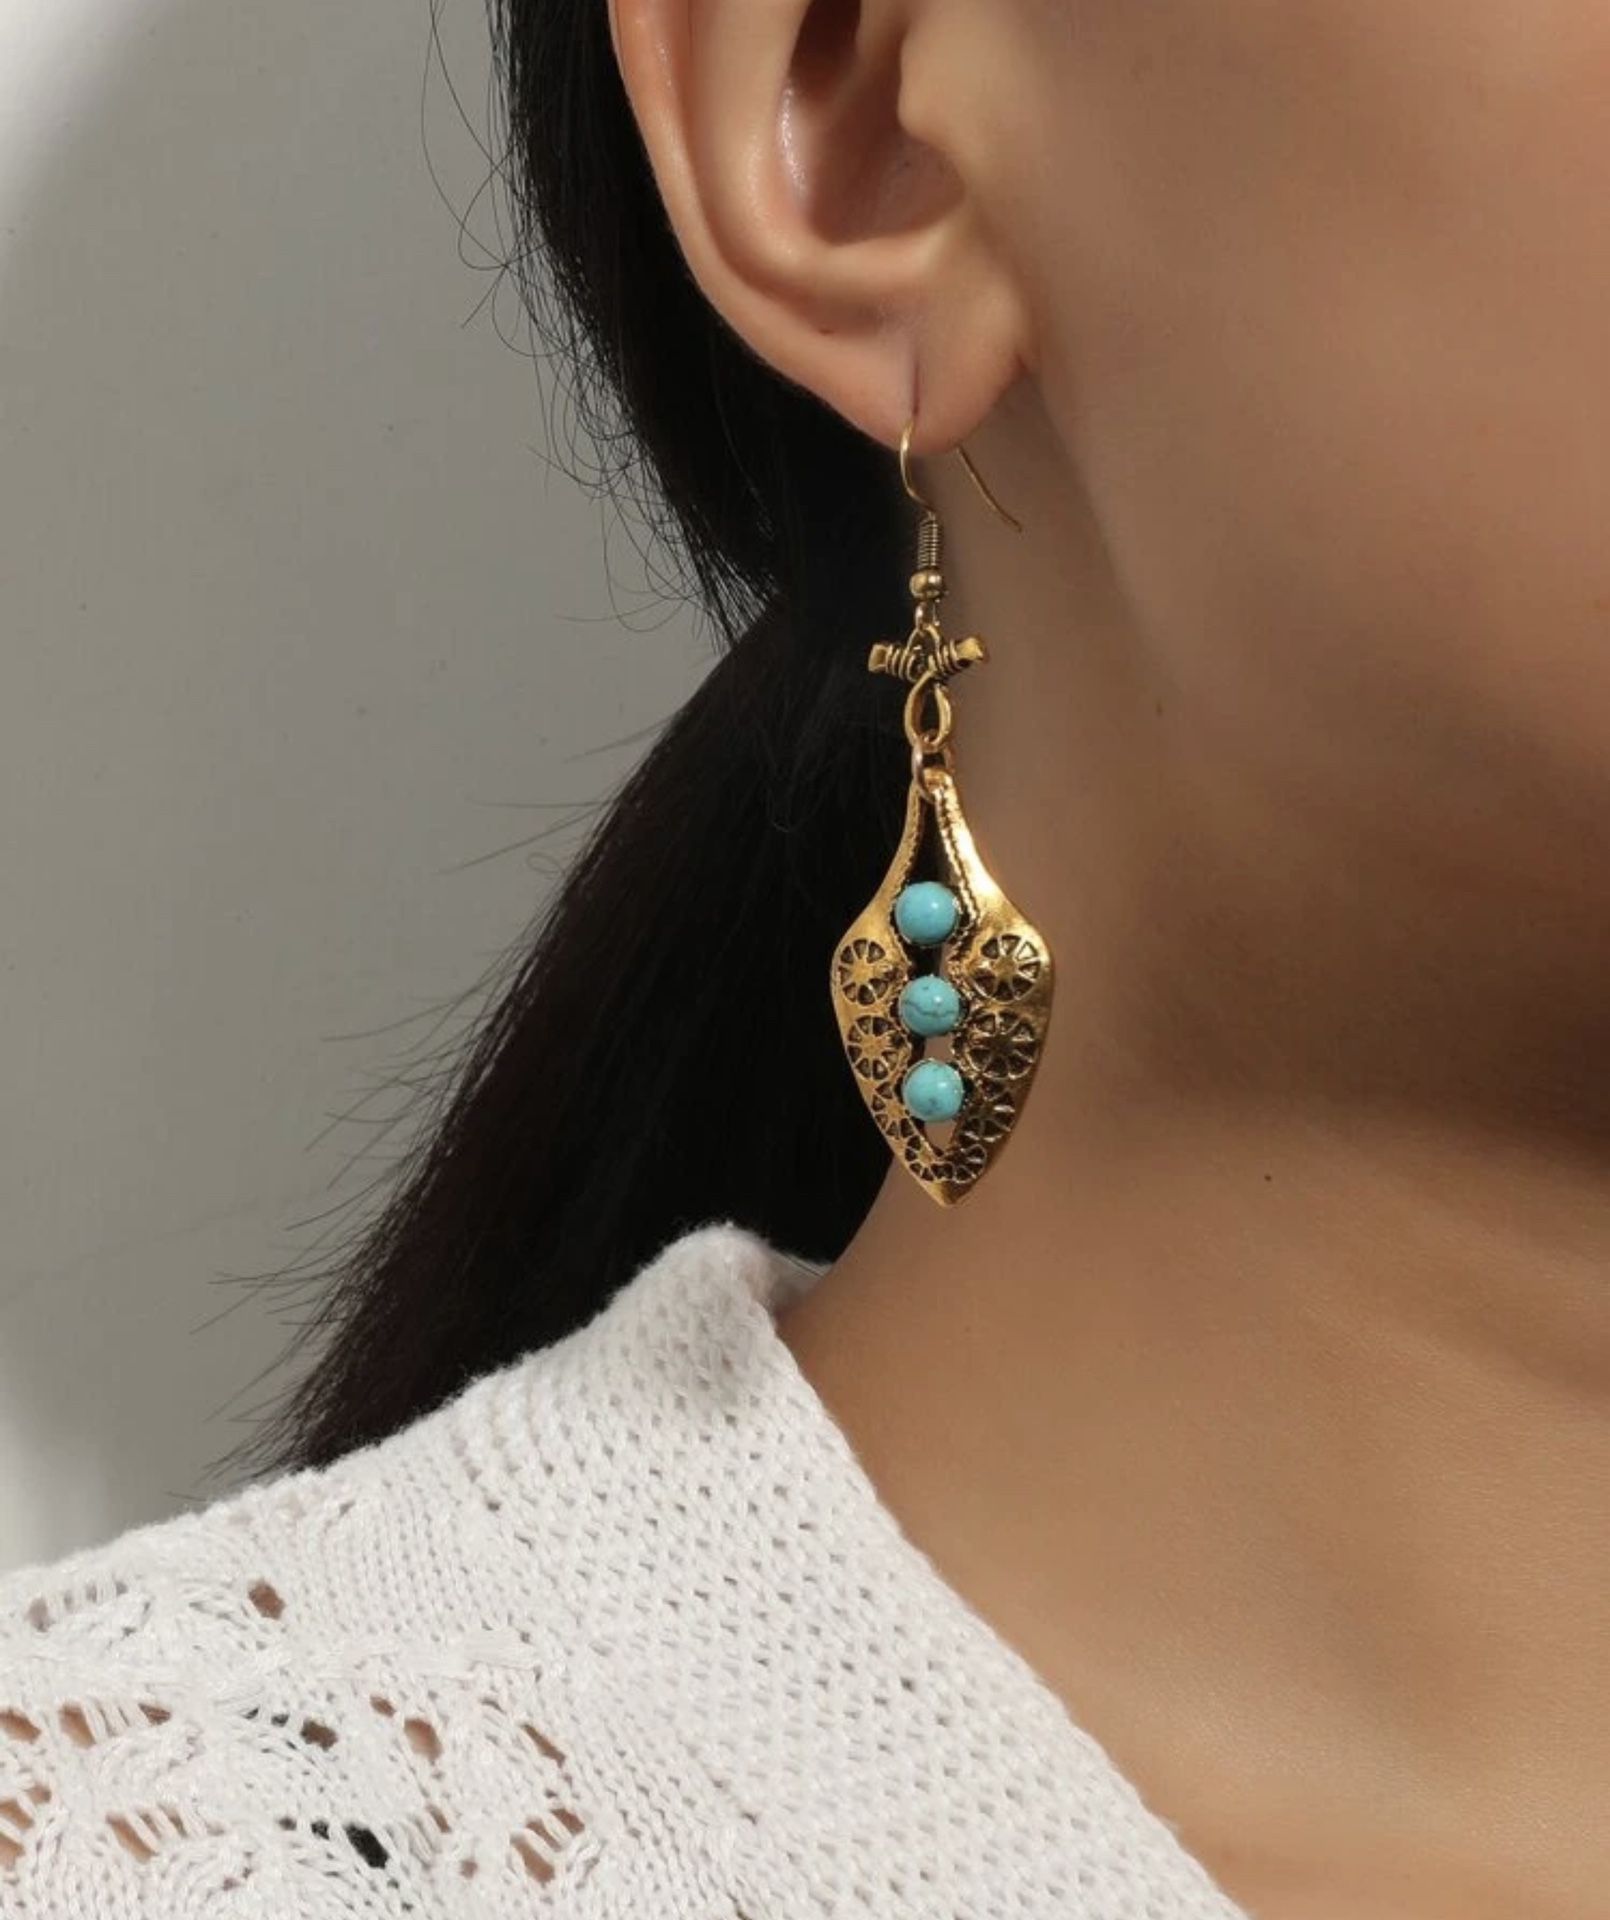 NEW Stunning Gold And Turqouise Stone Statement Women’s Fashion Jewelry Earrings